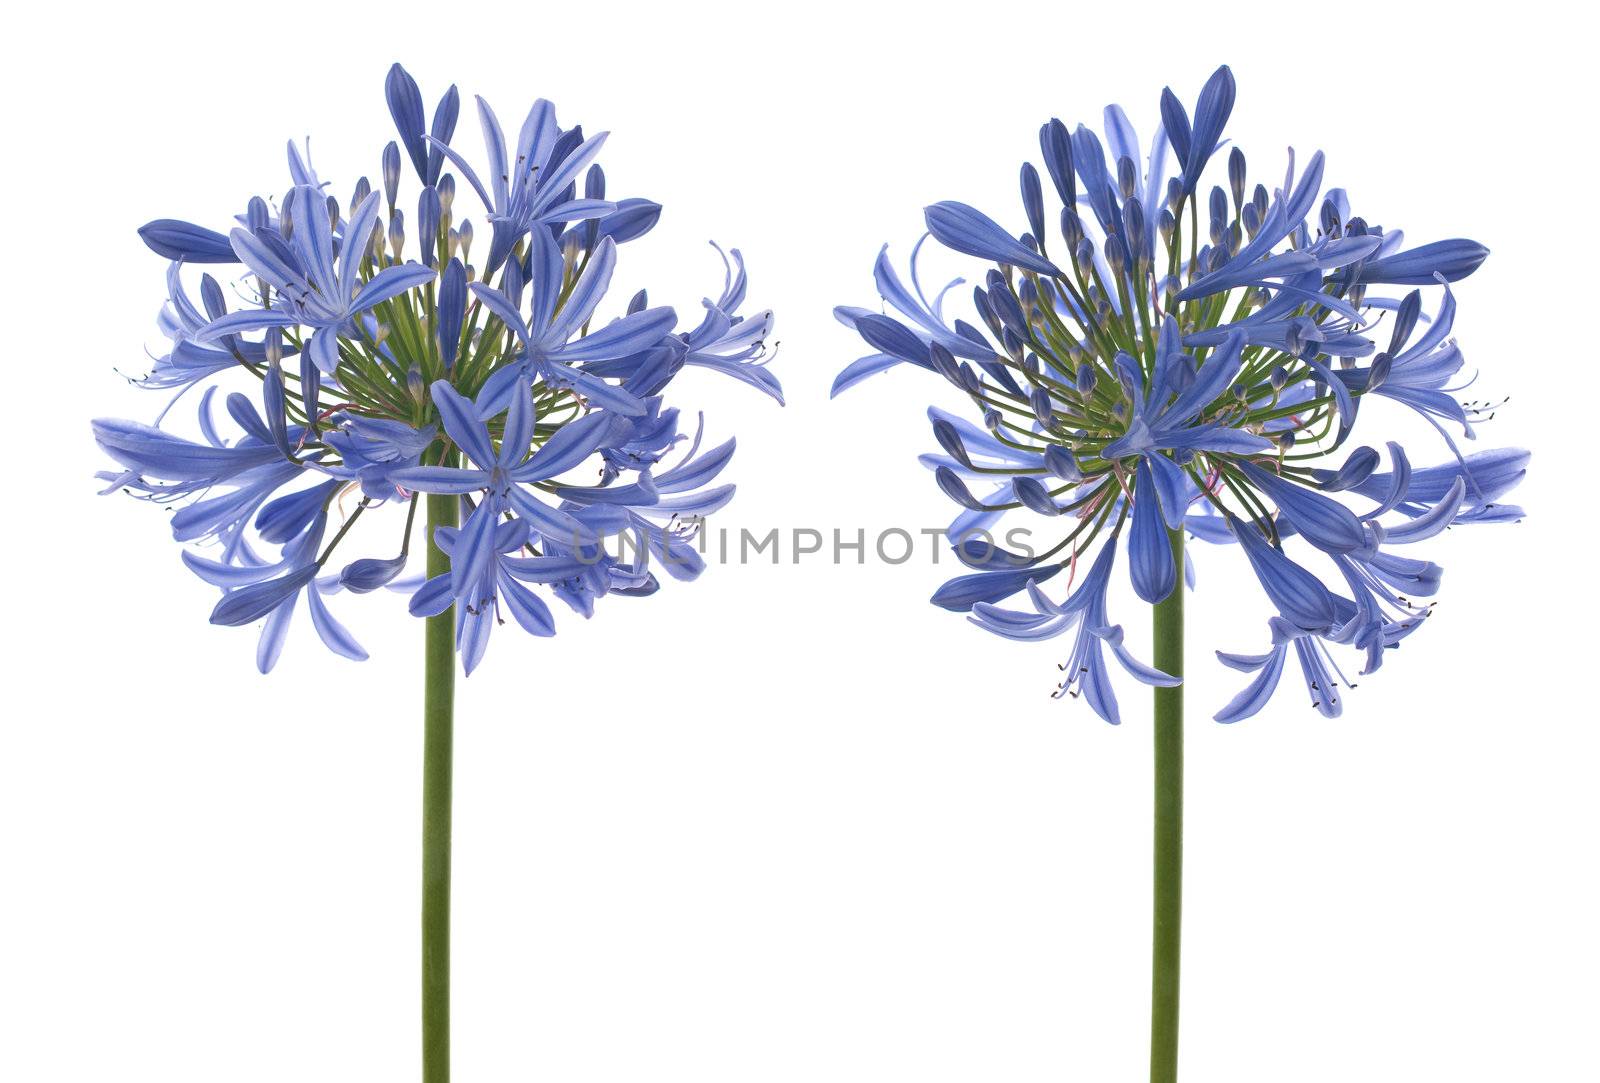 Agapanthus blooms with umbrella like flower clusters of funnel shaped flowers on tall leafless stalks. Space for copy.